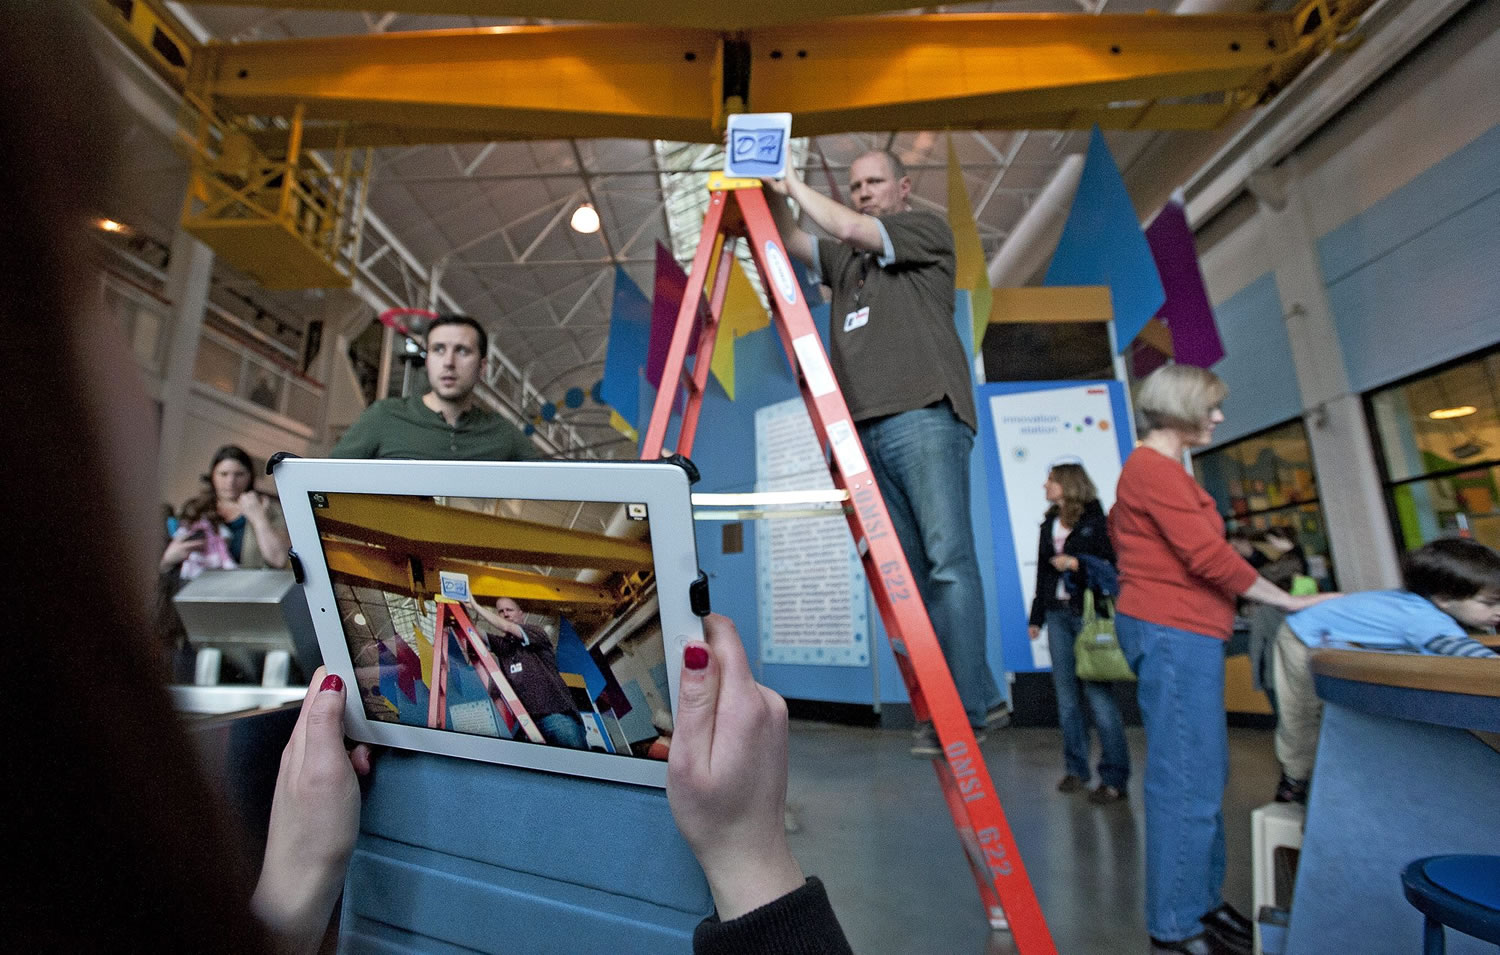 Washington State University Vancouver student Madi Kozacek, foreground left, points an iPad at an object representing the digital hot spots that will be installed on a display automobile at the Oregon Museum of Science and Industry in Portland. OMSI's Jeff Varner, center, holds the object at the appropriate height. At right is WSUV student Jason Clark.